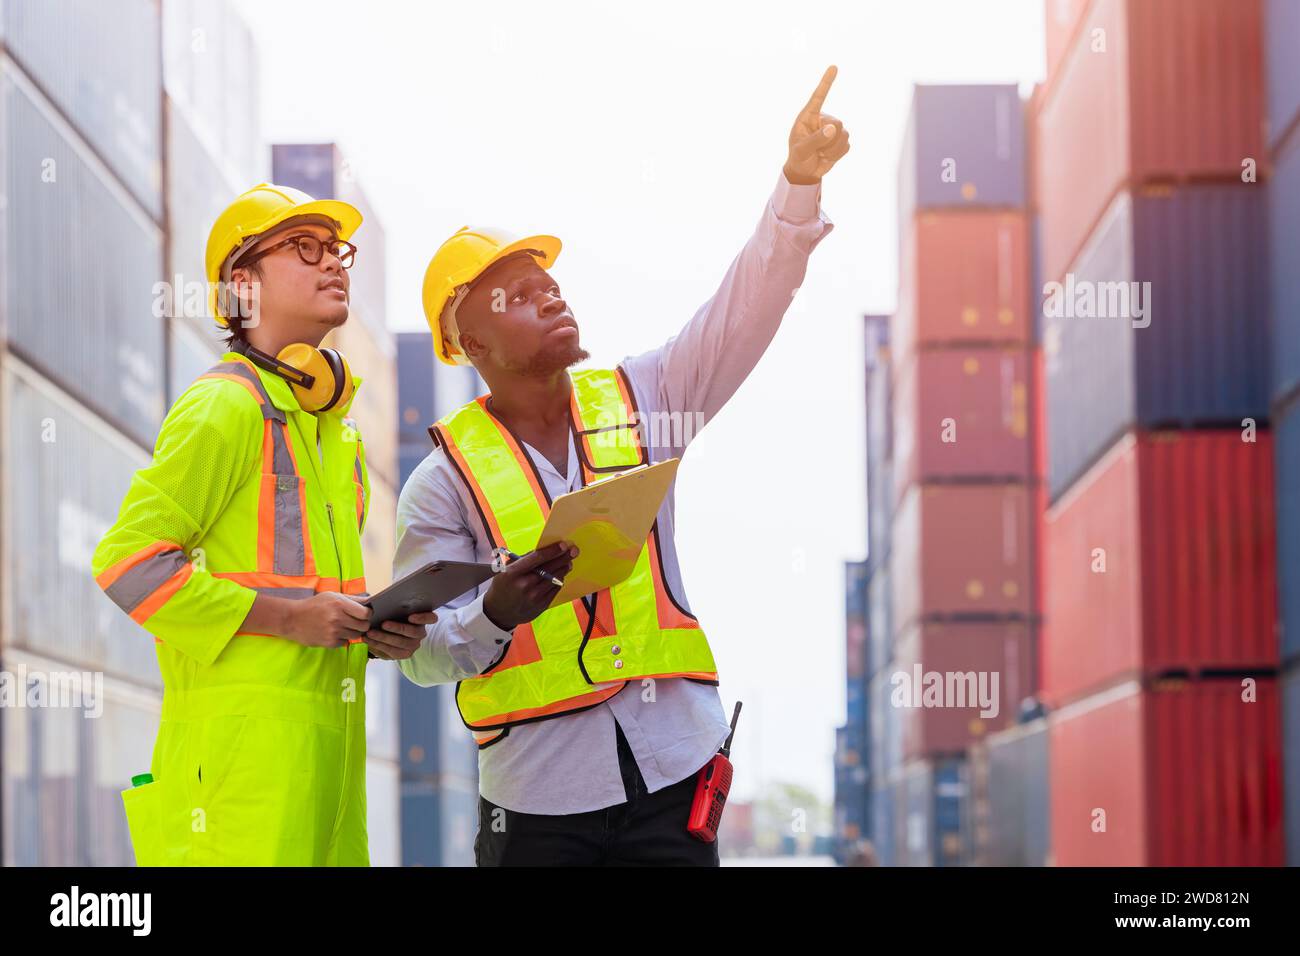 diversity model staff workers in port container yard logistics cargo shipping import export management industry teamwork. Stock Photo